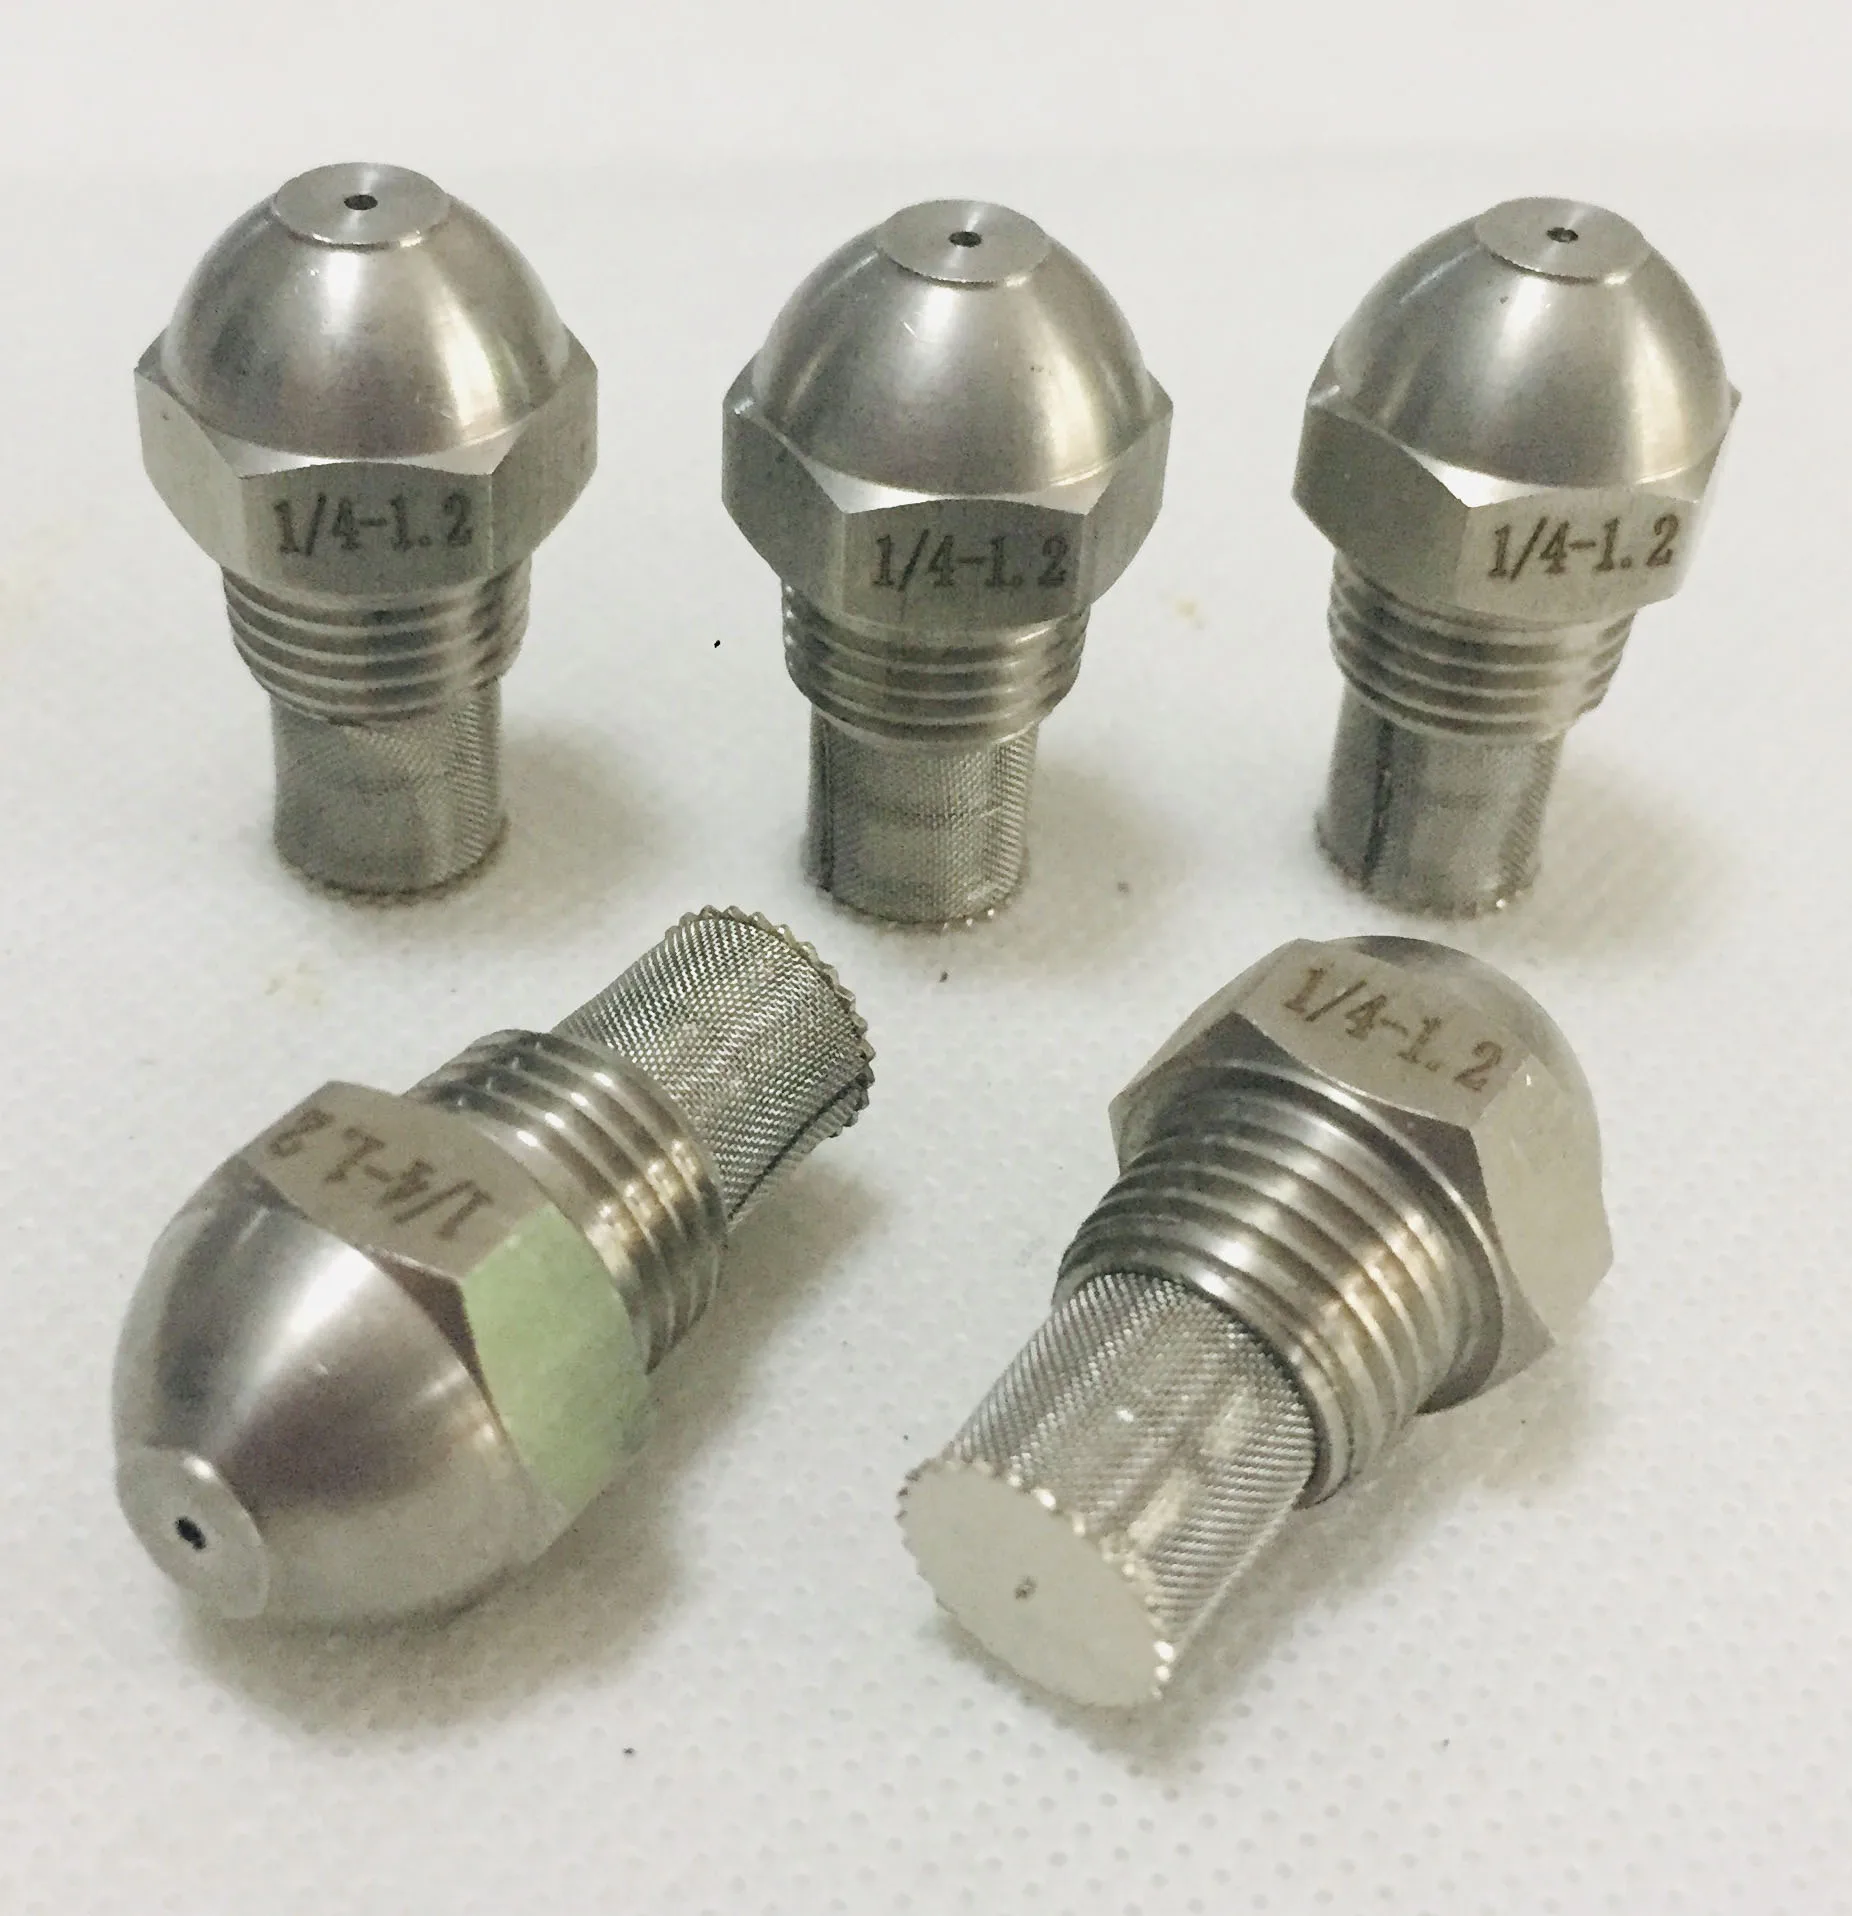 10 pcs 1/4" Male Thread Stainless steel waste oil burner nozzle, water mist nozzle for cooling and humidification